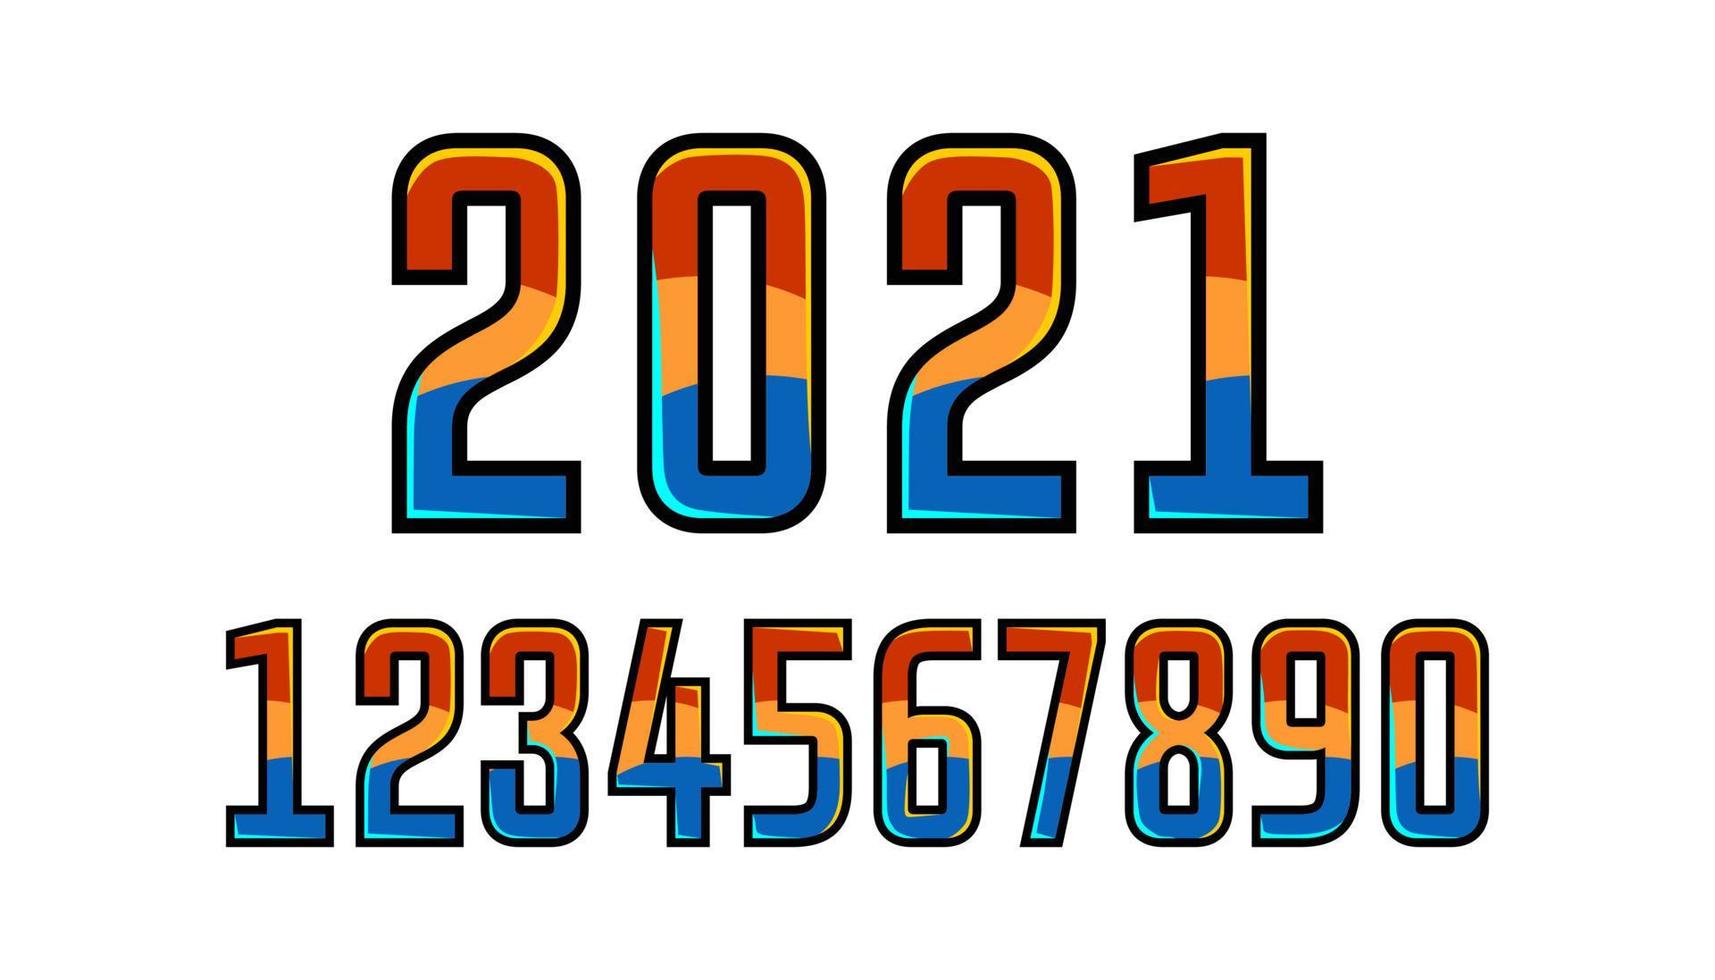 numbers that are manipulated in shapes and colors and different variations as materials to beautify your future design vector